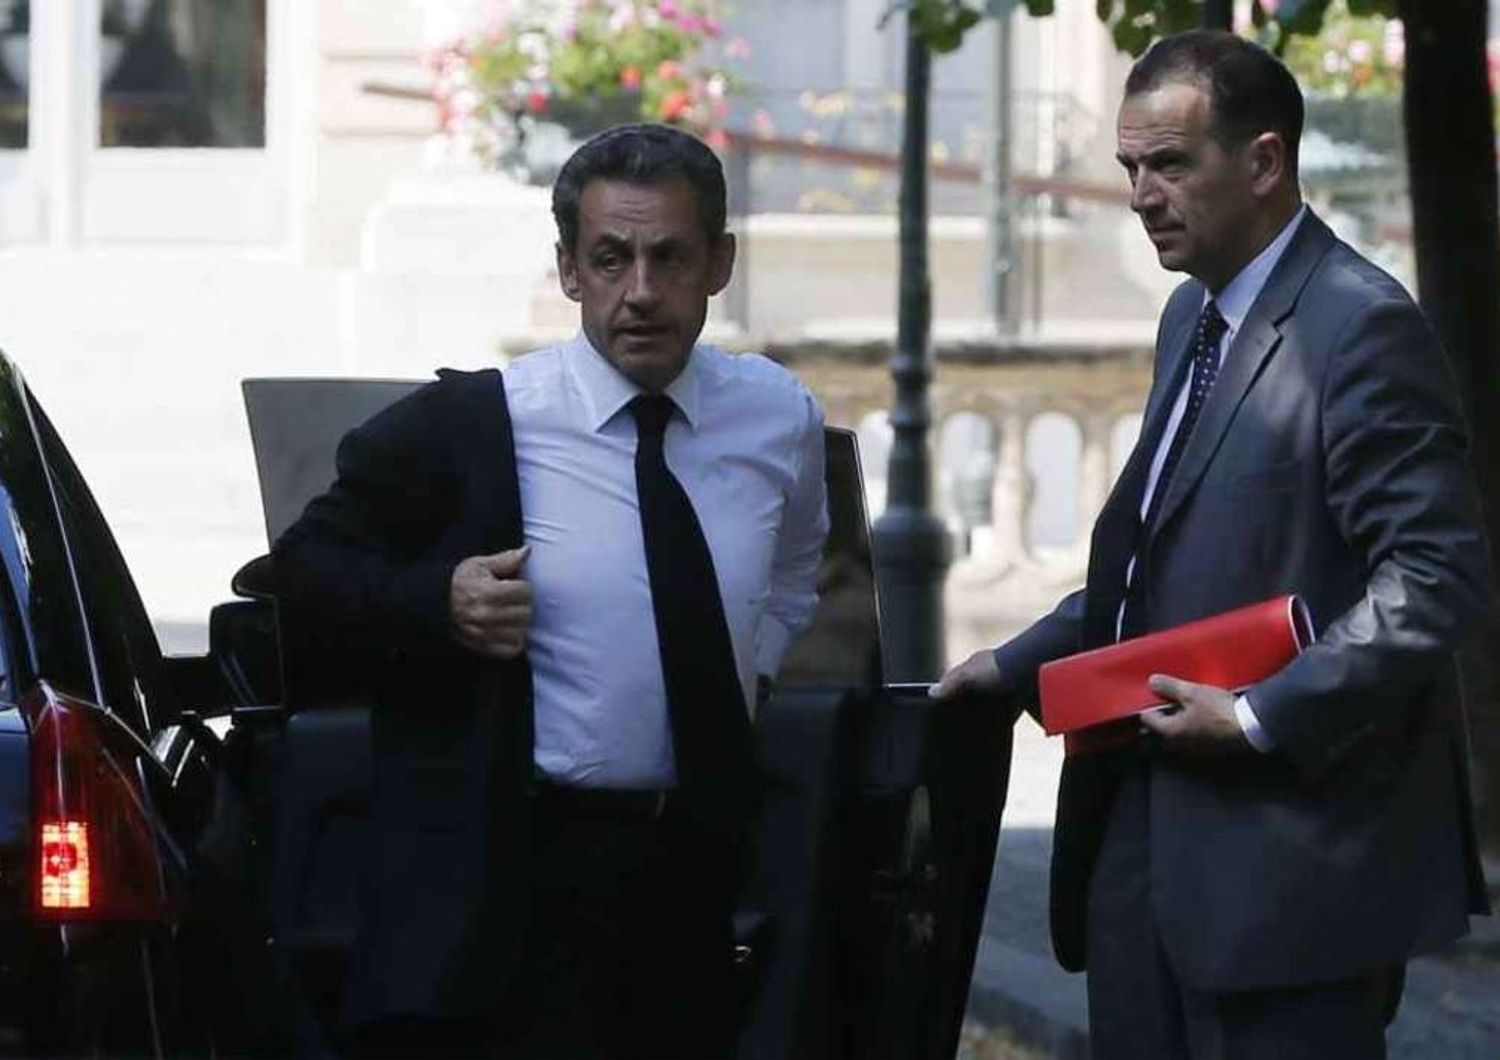 France's Sarkozy detained over alleged corruption